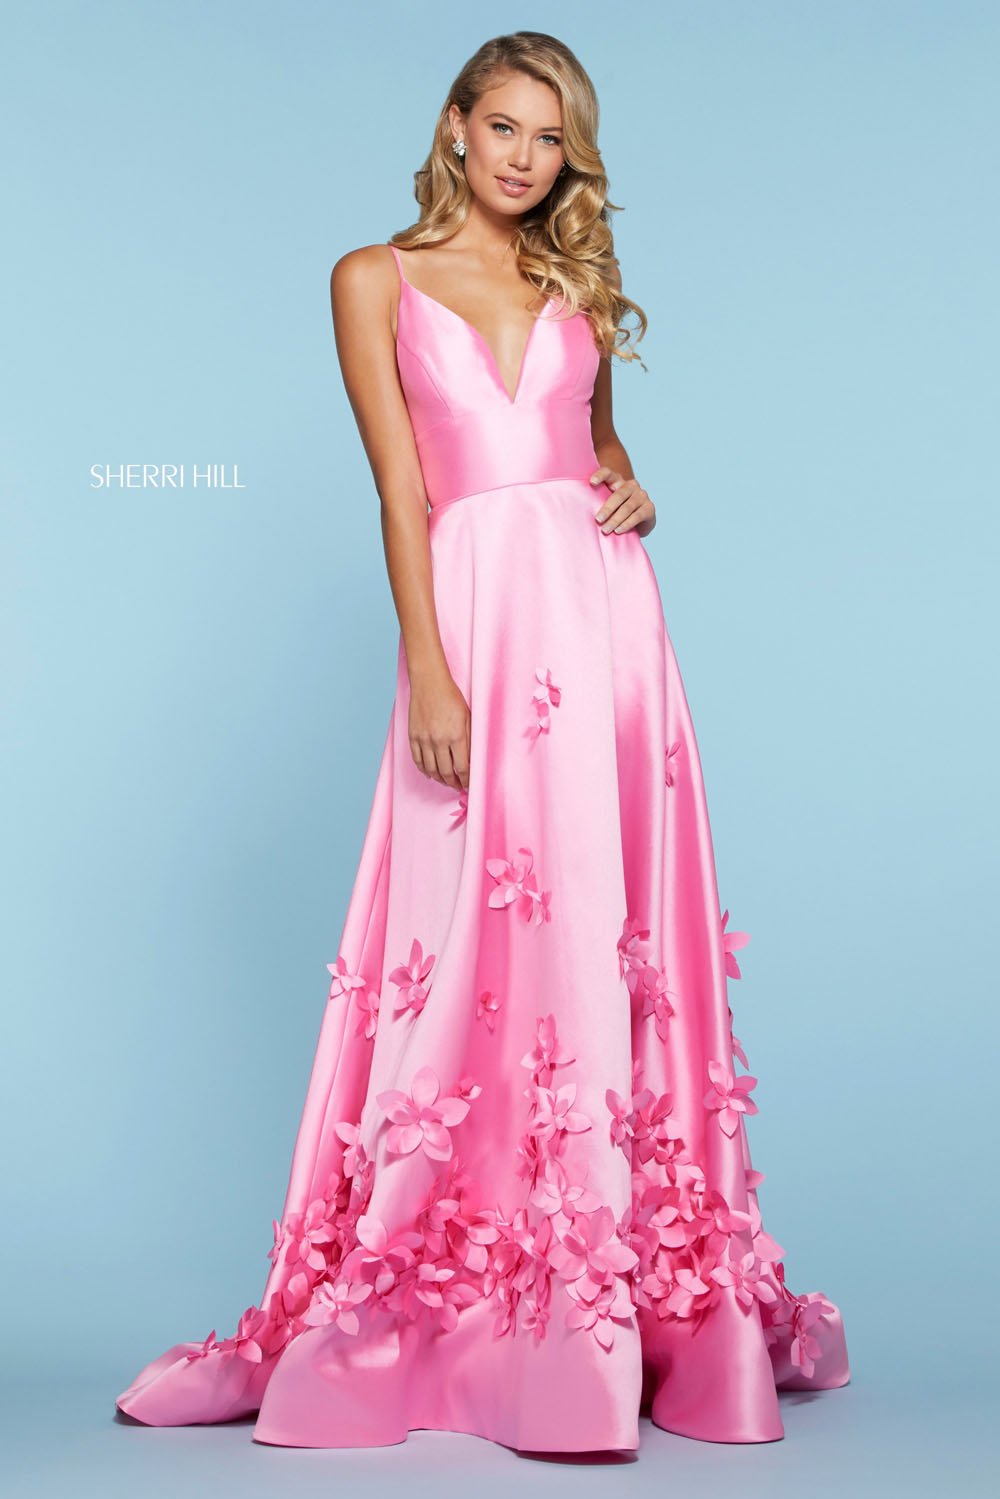 Sherri Hill 53337 dress images in these colors: Lilac, Light Blue, Candy Pink, Yellow, Ivory, Red.